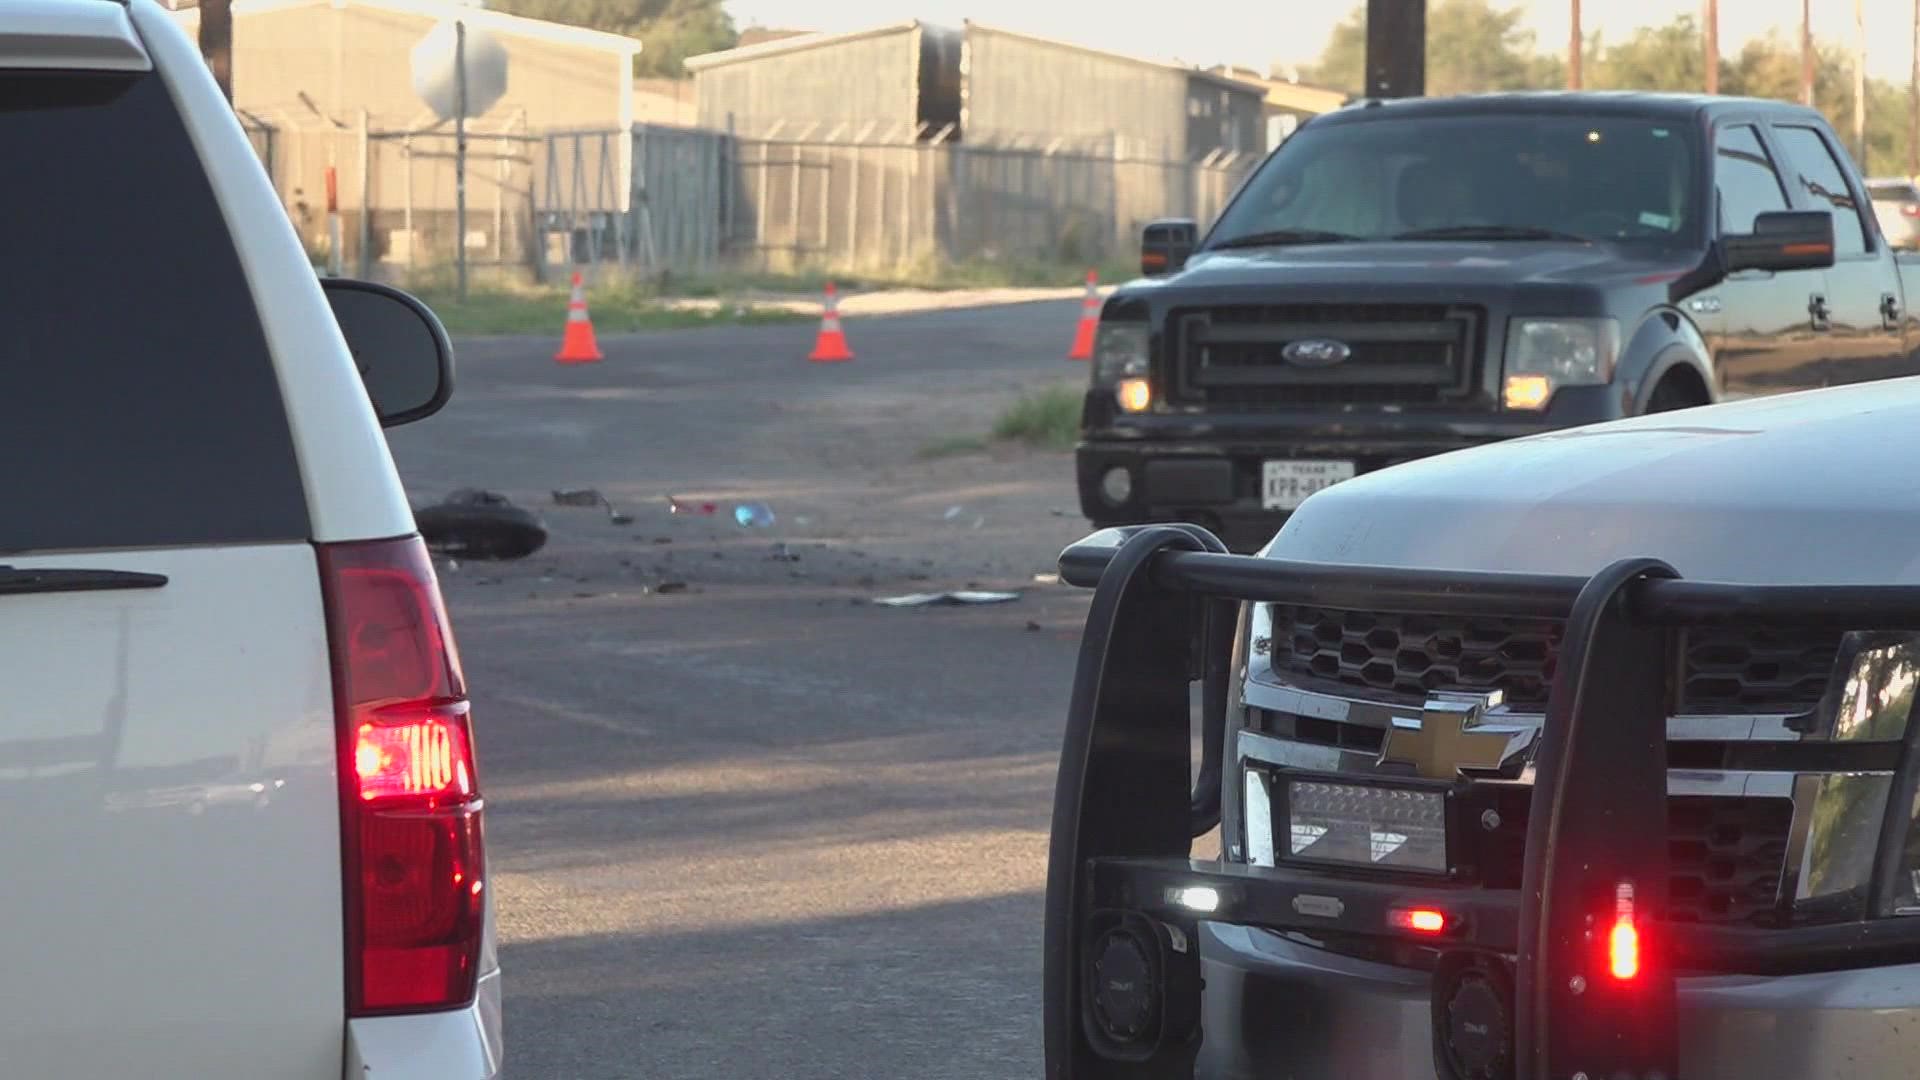 The crash, which was between a truck and a motorcycle, happened around 6 a.m. Tuesday.